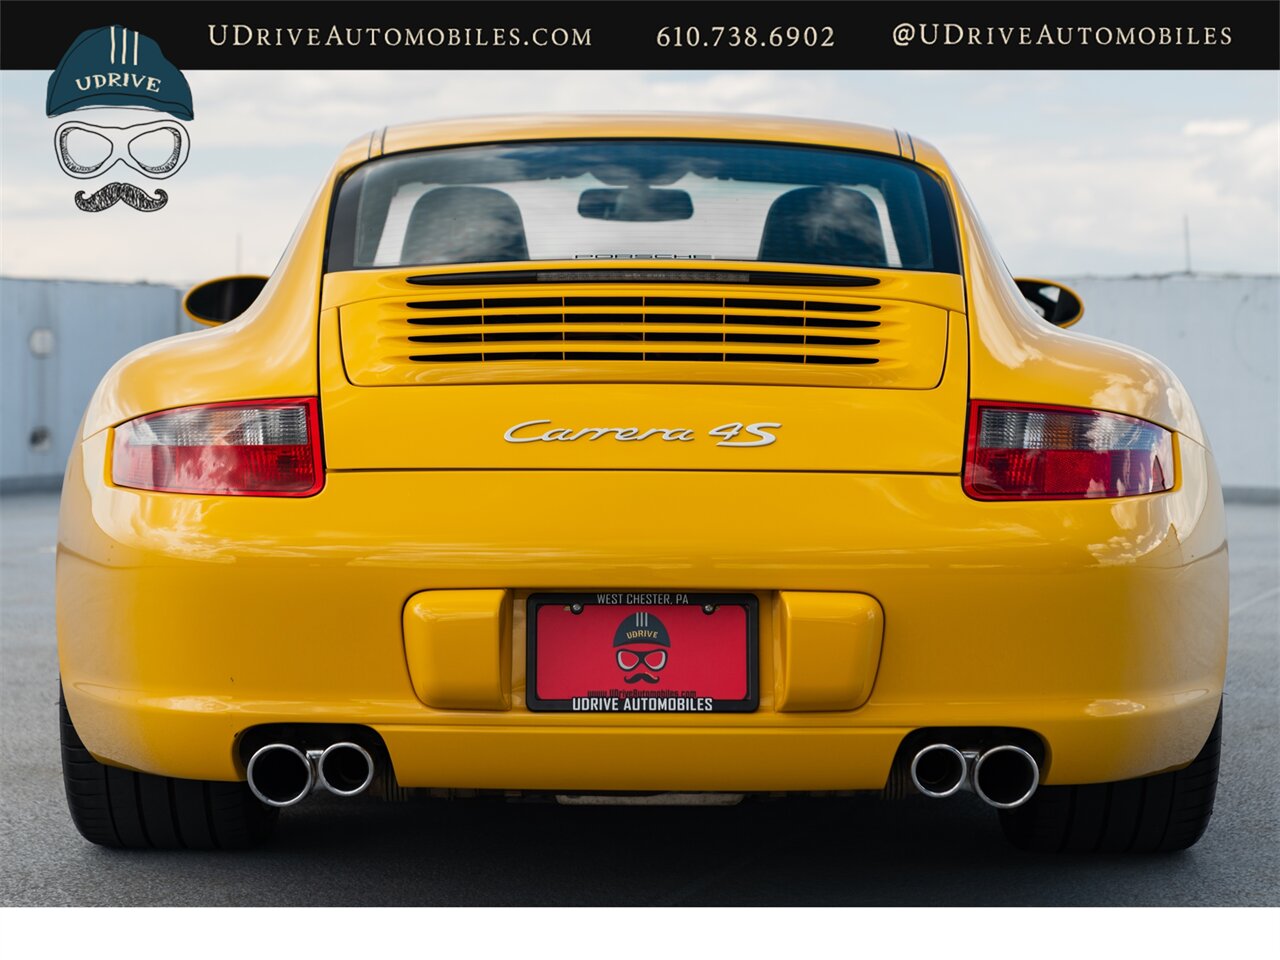 2006 Porsche 911 Carrera 4S  997 C4S 6 Speed Cocoa Full Lthr Chrono Sport Exhaust Special Color Combo - Photo 21 - West Chester, PA 19382